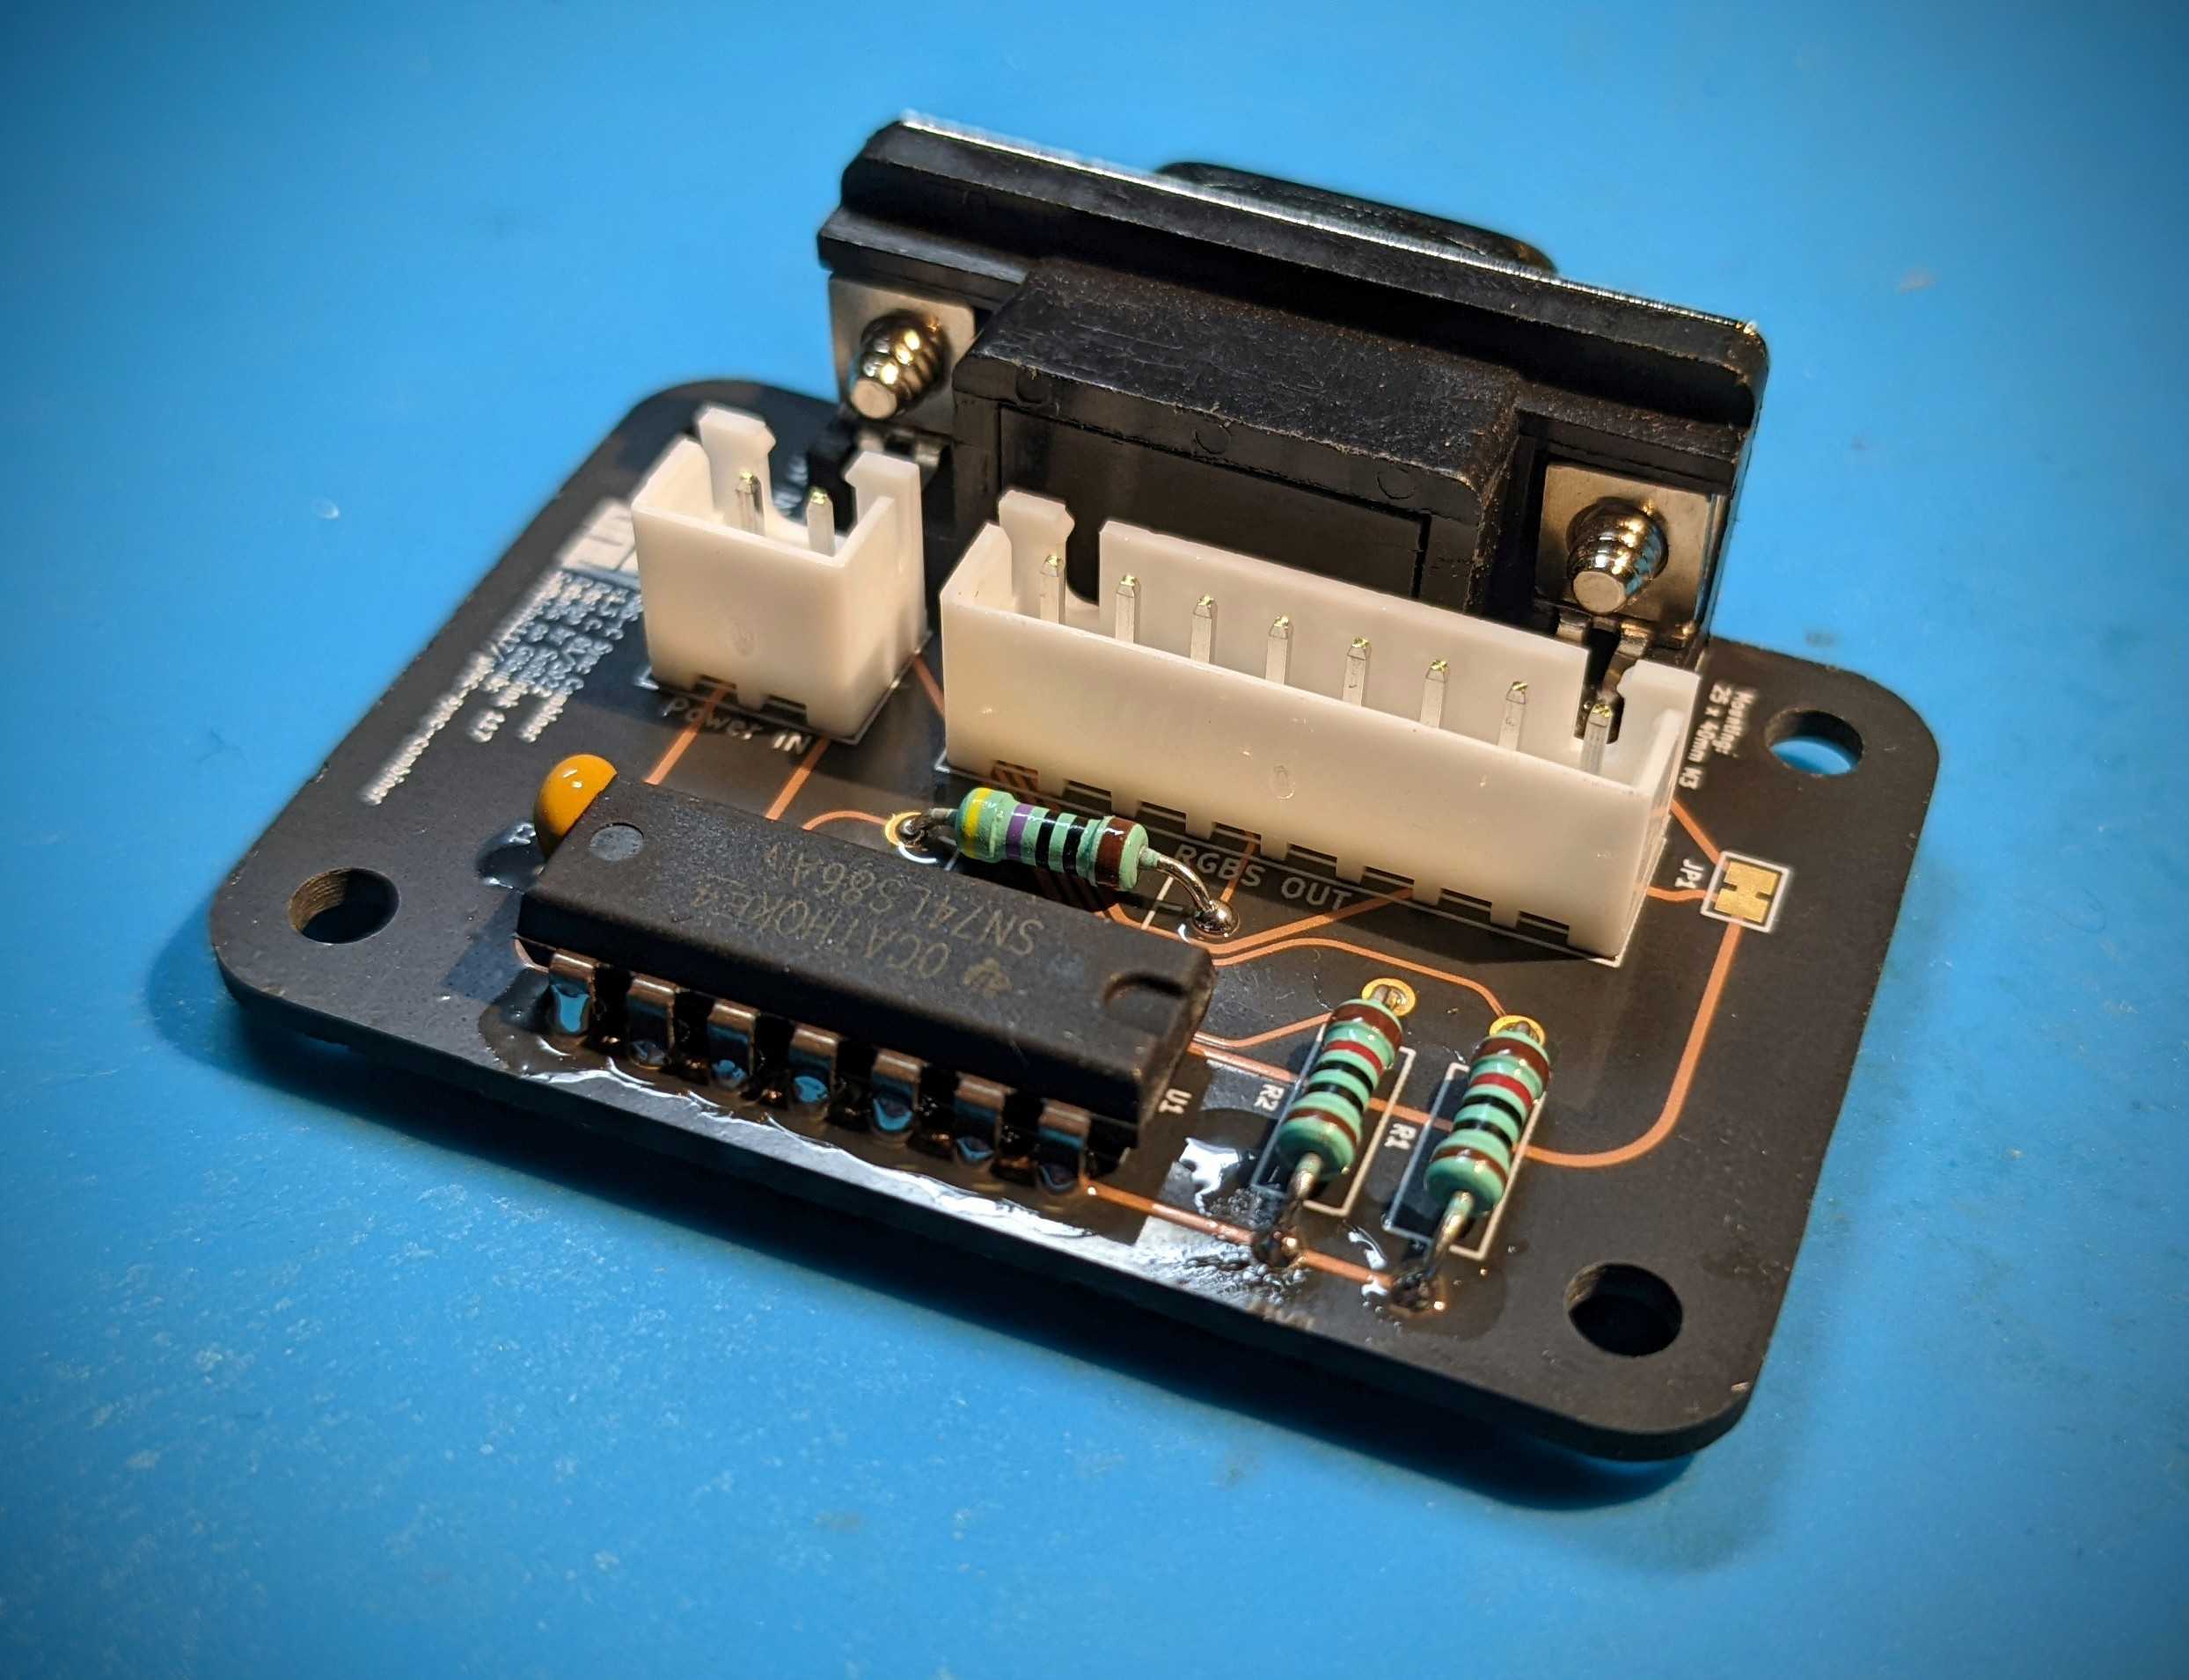 The third step of assembly: VGA connector.